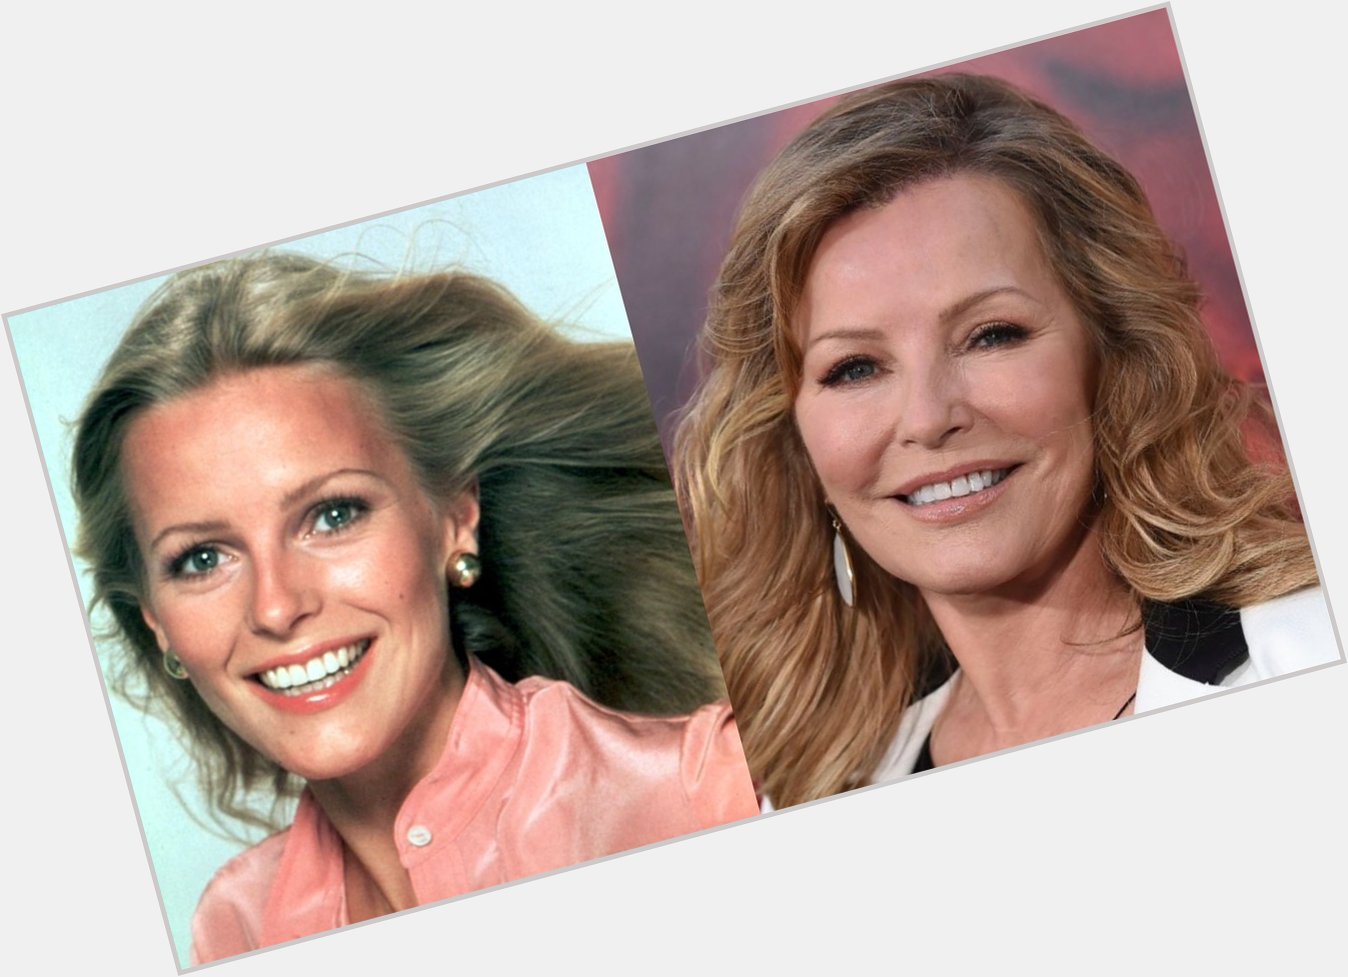 Happy birthday to Charlie s Angels alum Cheryl Ladd who is 69 today! 